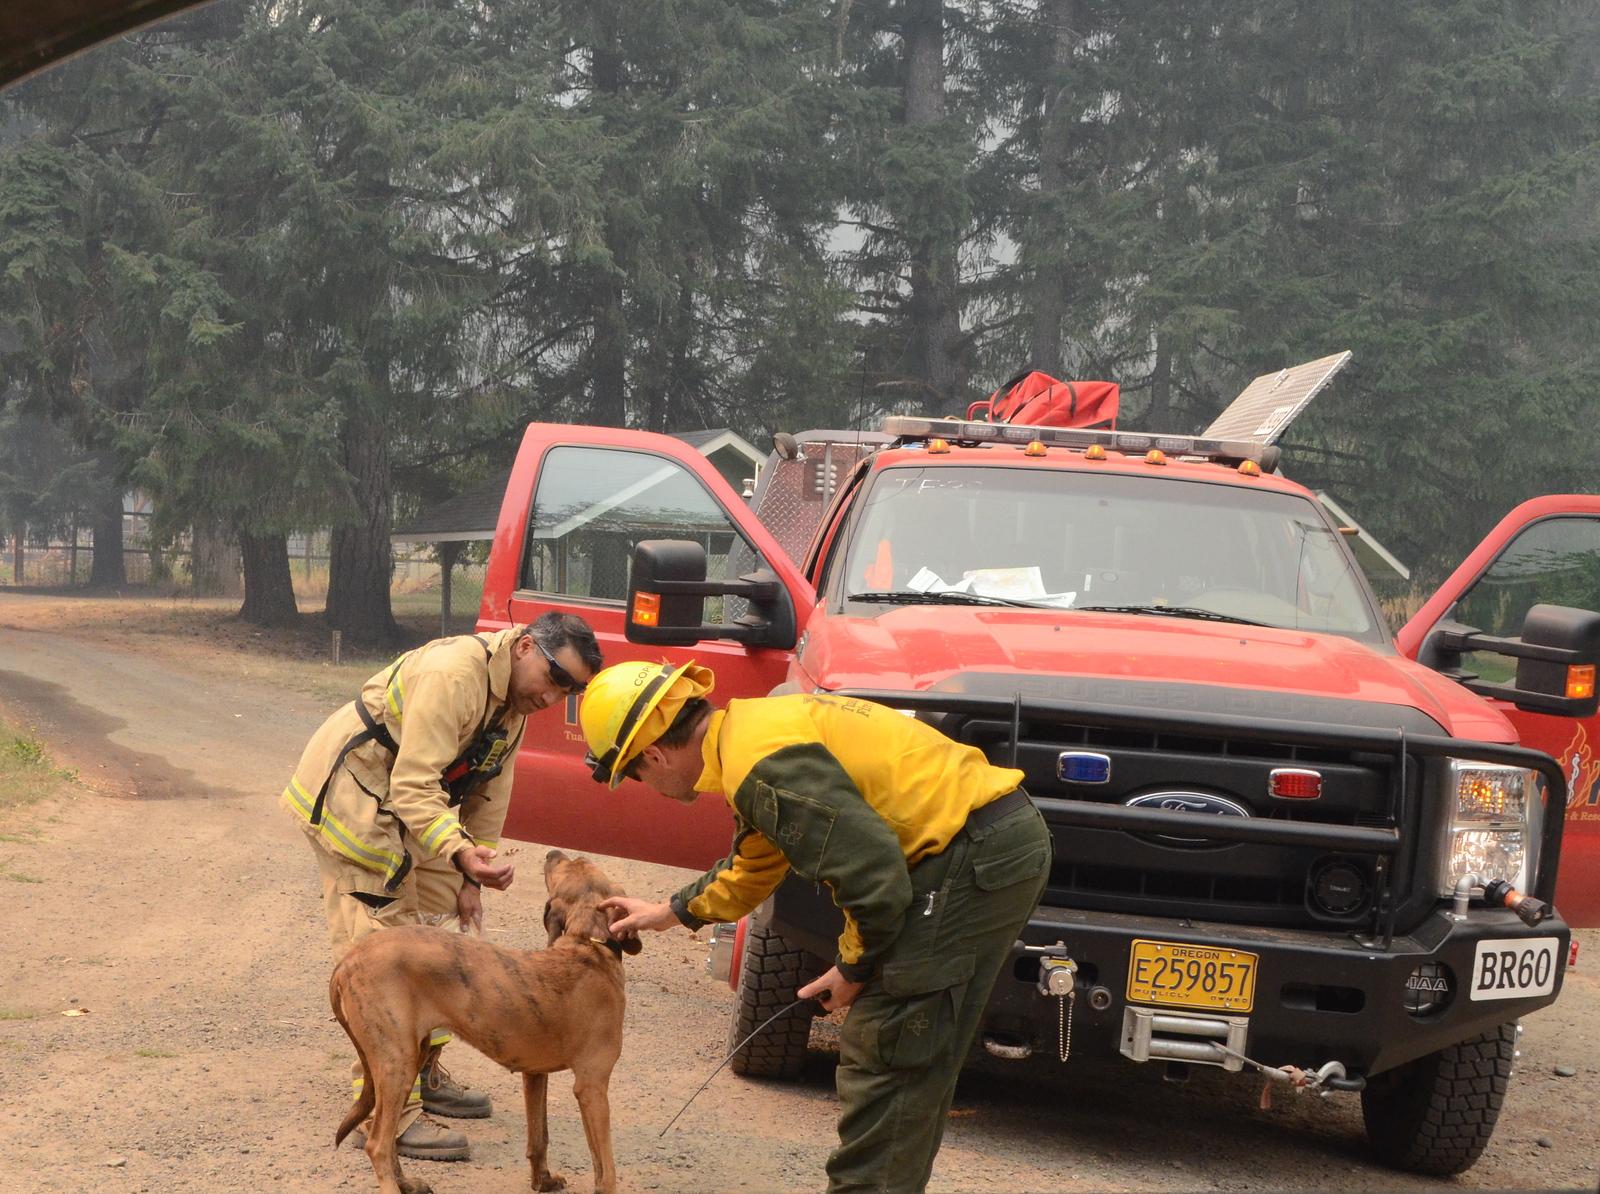 Dog welcoming Firefighters